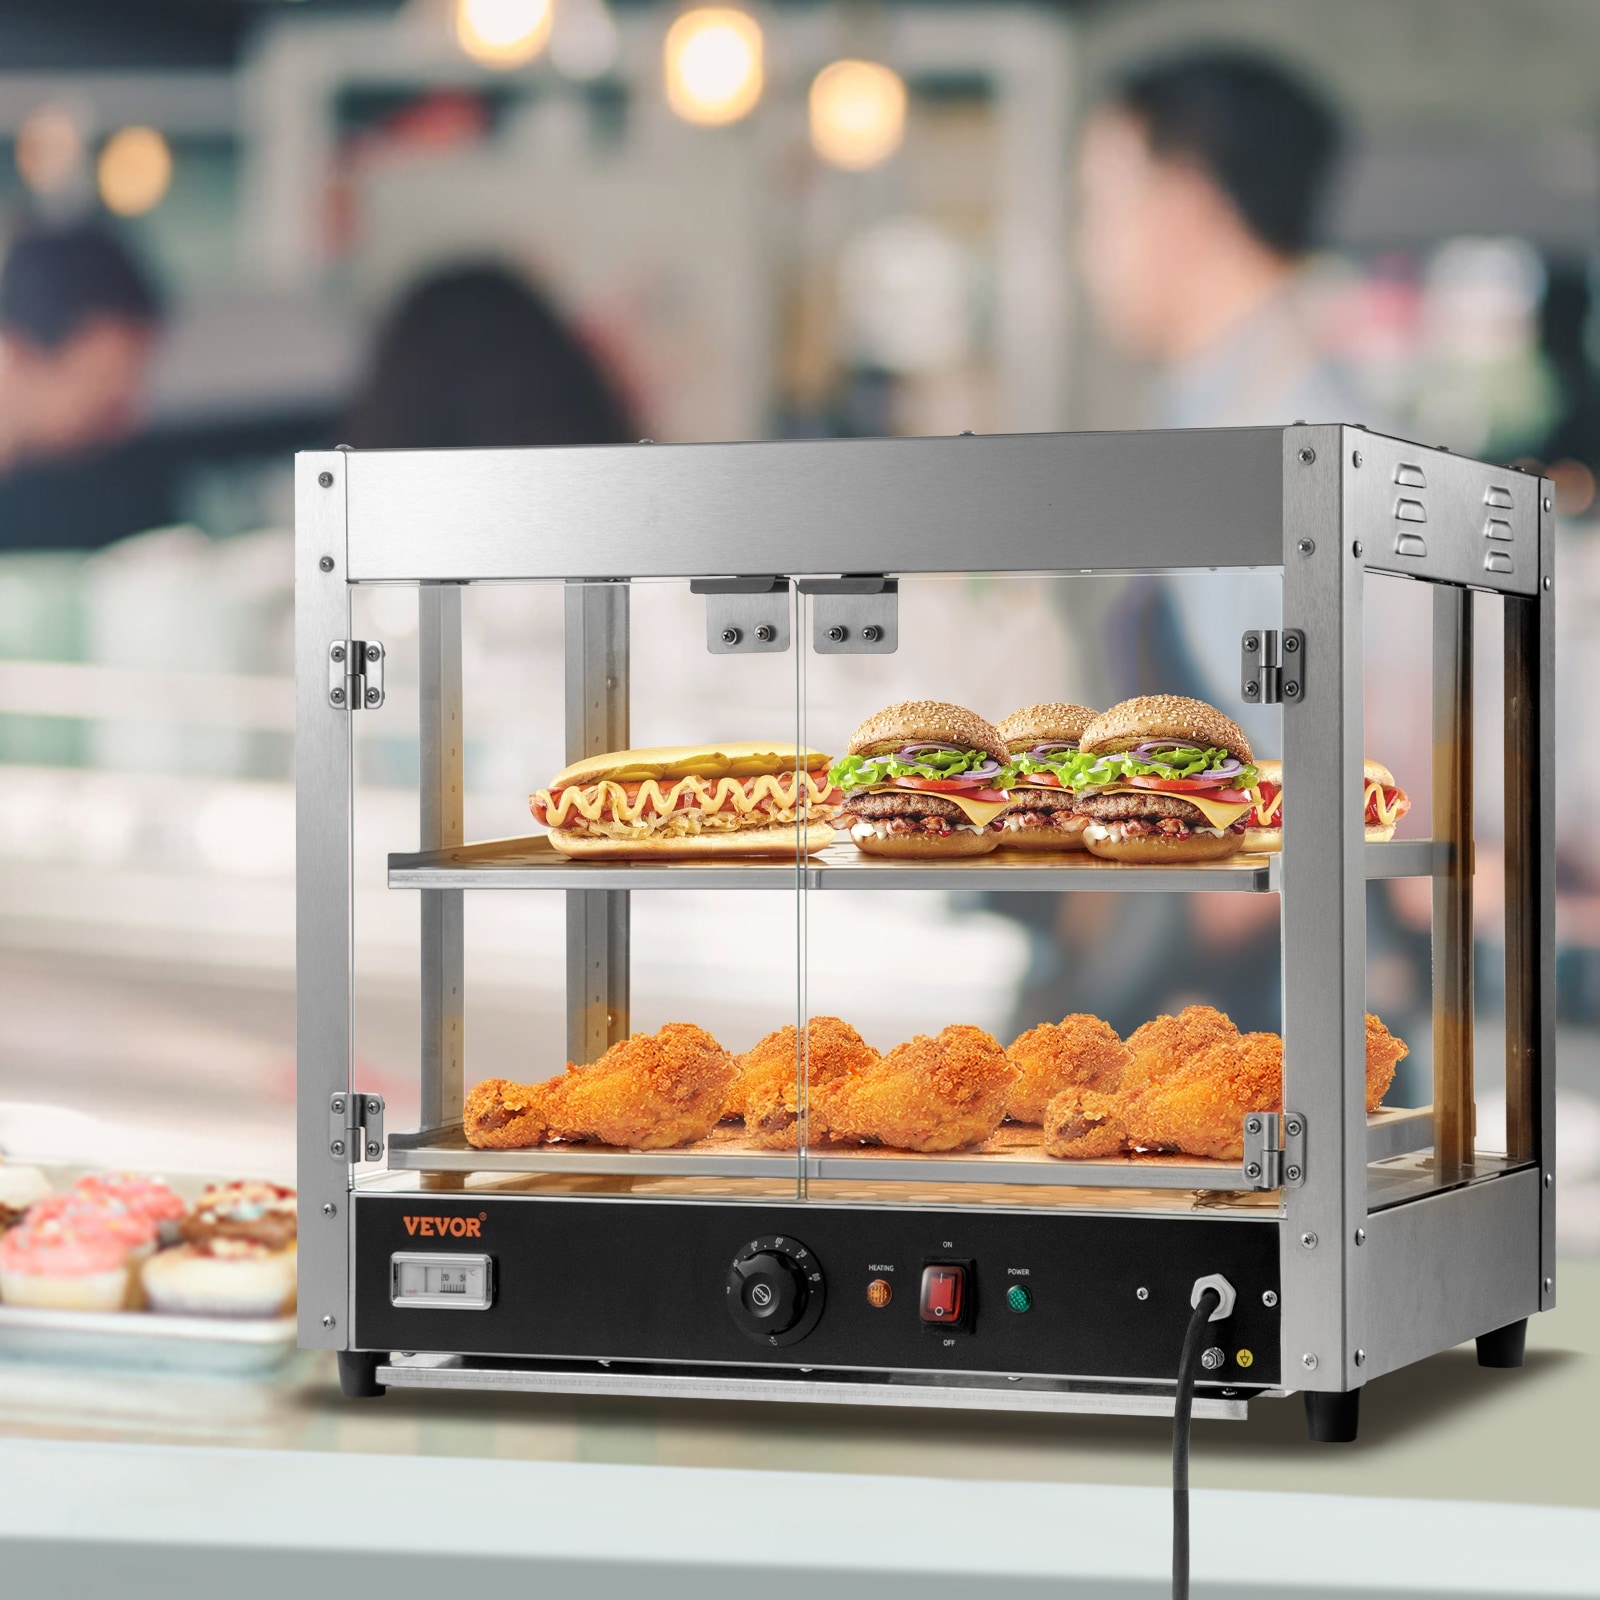 https://ak1.ostkcdn.com/images/products/is/images/direct/d2b9192697ed3138cb341f9fdb4c05caa0b4c512/VEVOR-Commercial-Food-Warmer-Display-Countertop-Pizza-Hot-Dog-Cabinet-Case.jpg